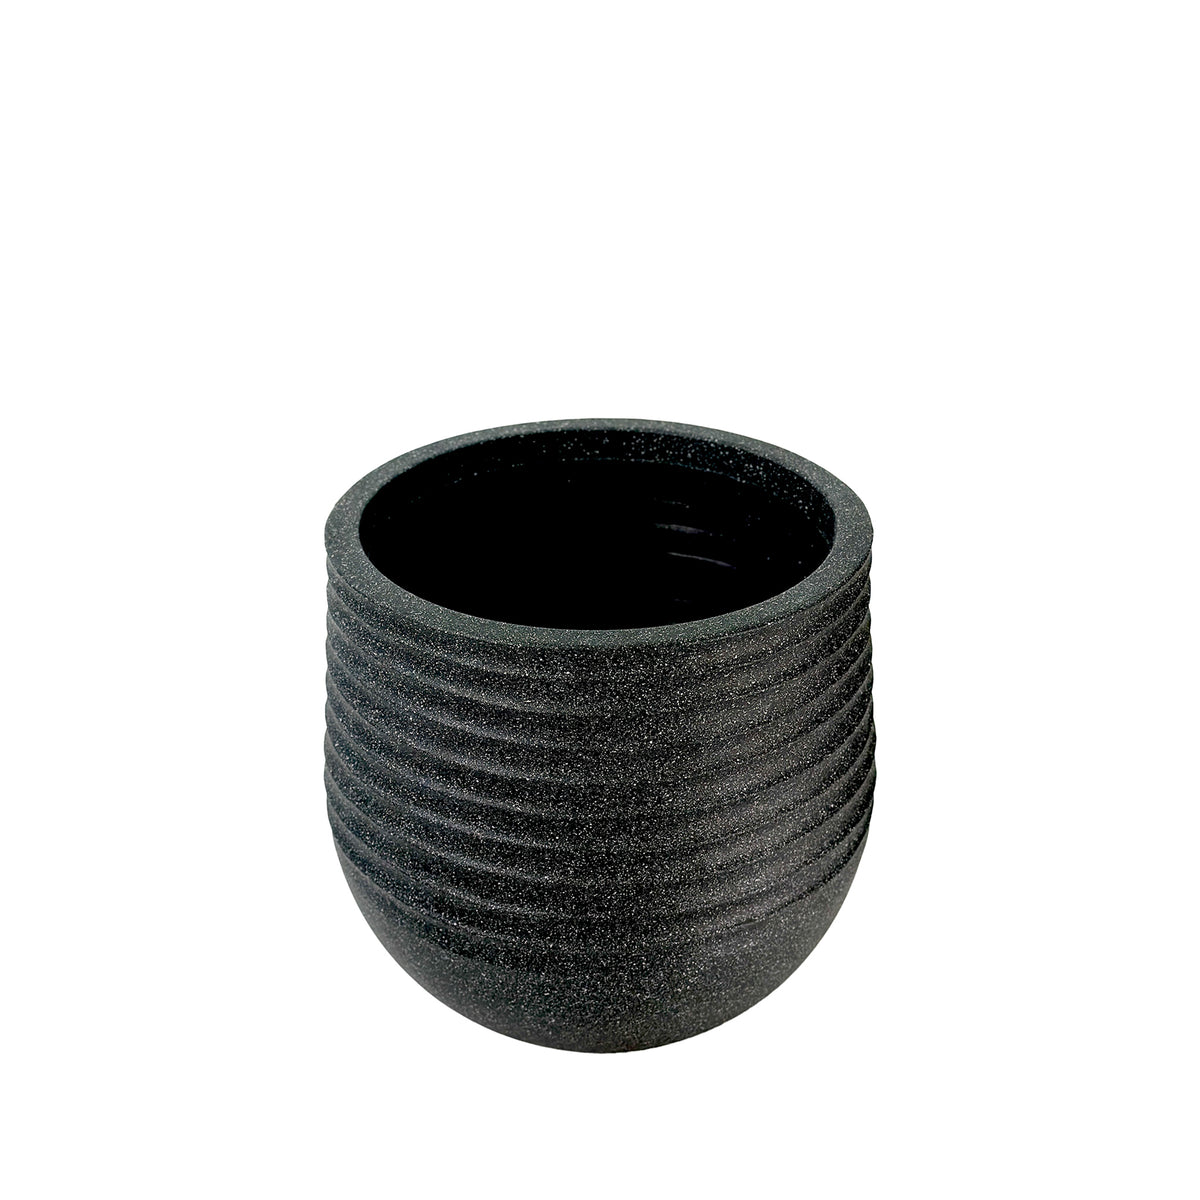 30cm Poly-resin, Small Ribbed planter, Mediterranean Black with a terrazzo finish, Lightweight, Weather resistant and eco friendly, Front view.